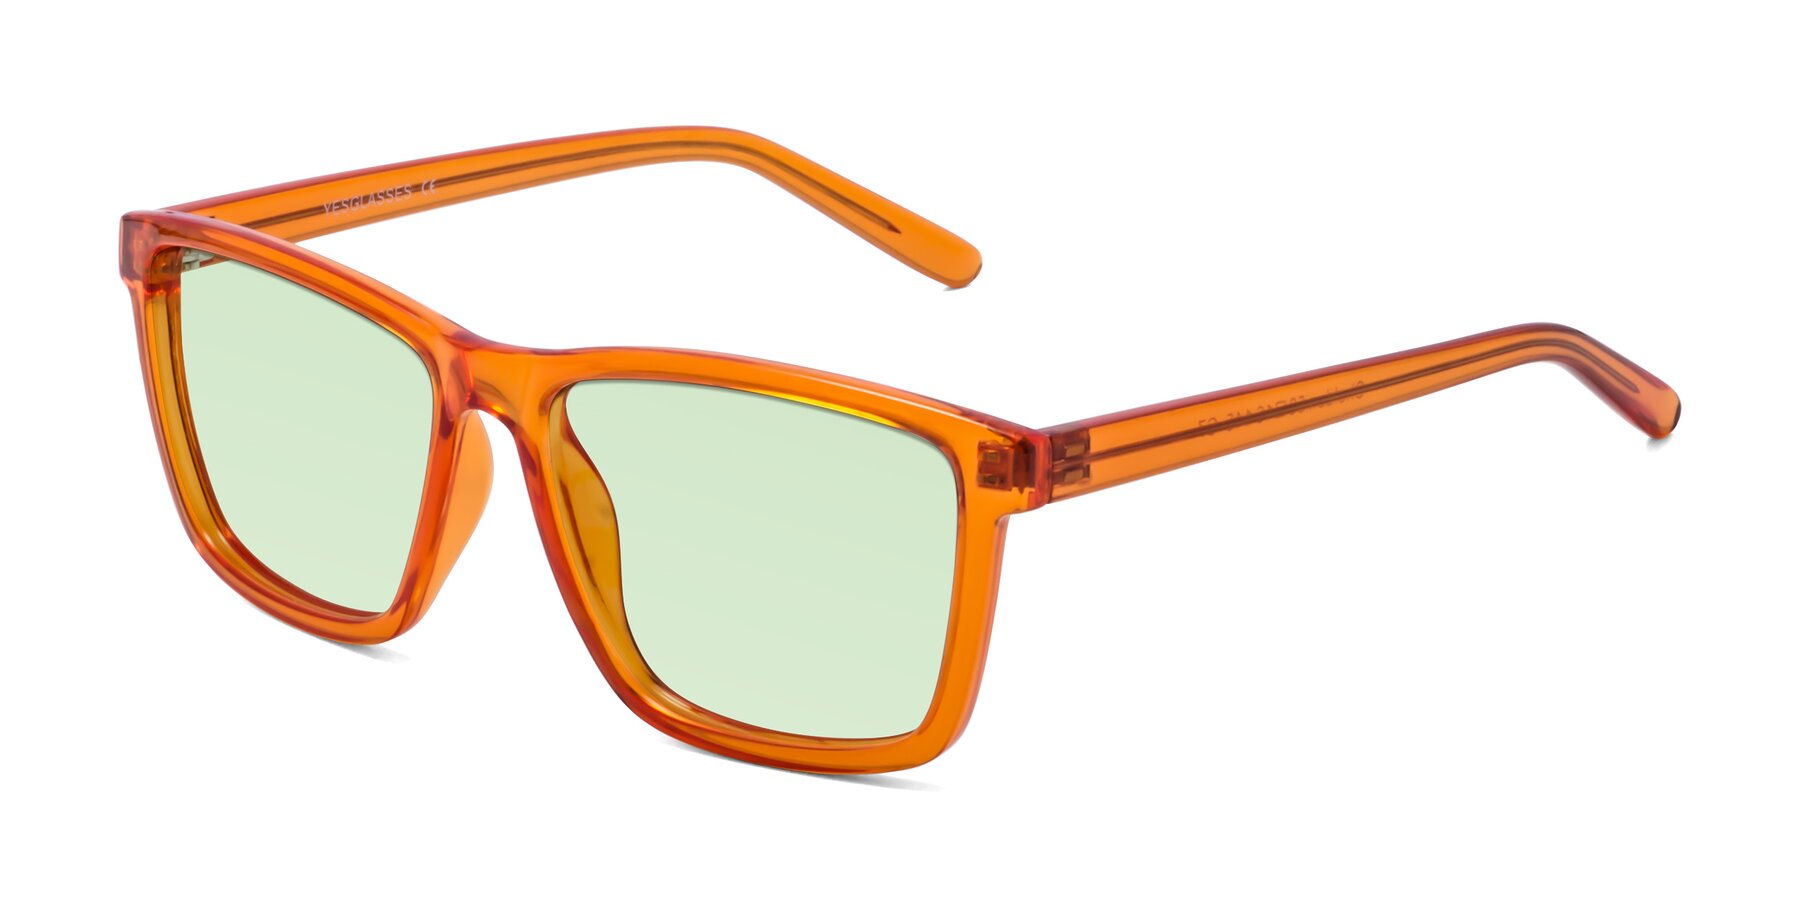 Angle of Sheldon in Orange with Light Green Tinted Lenses